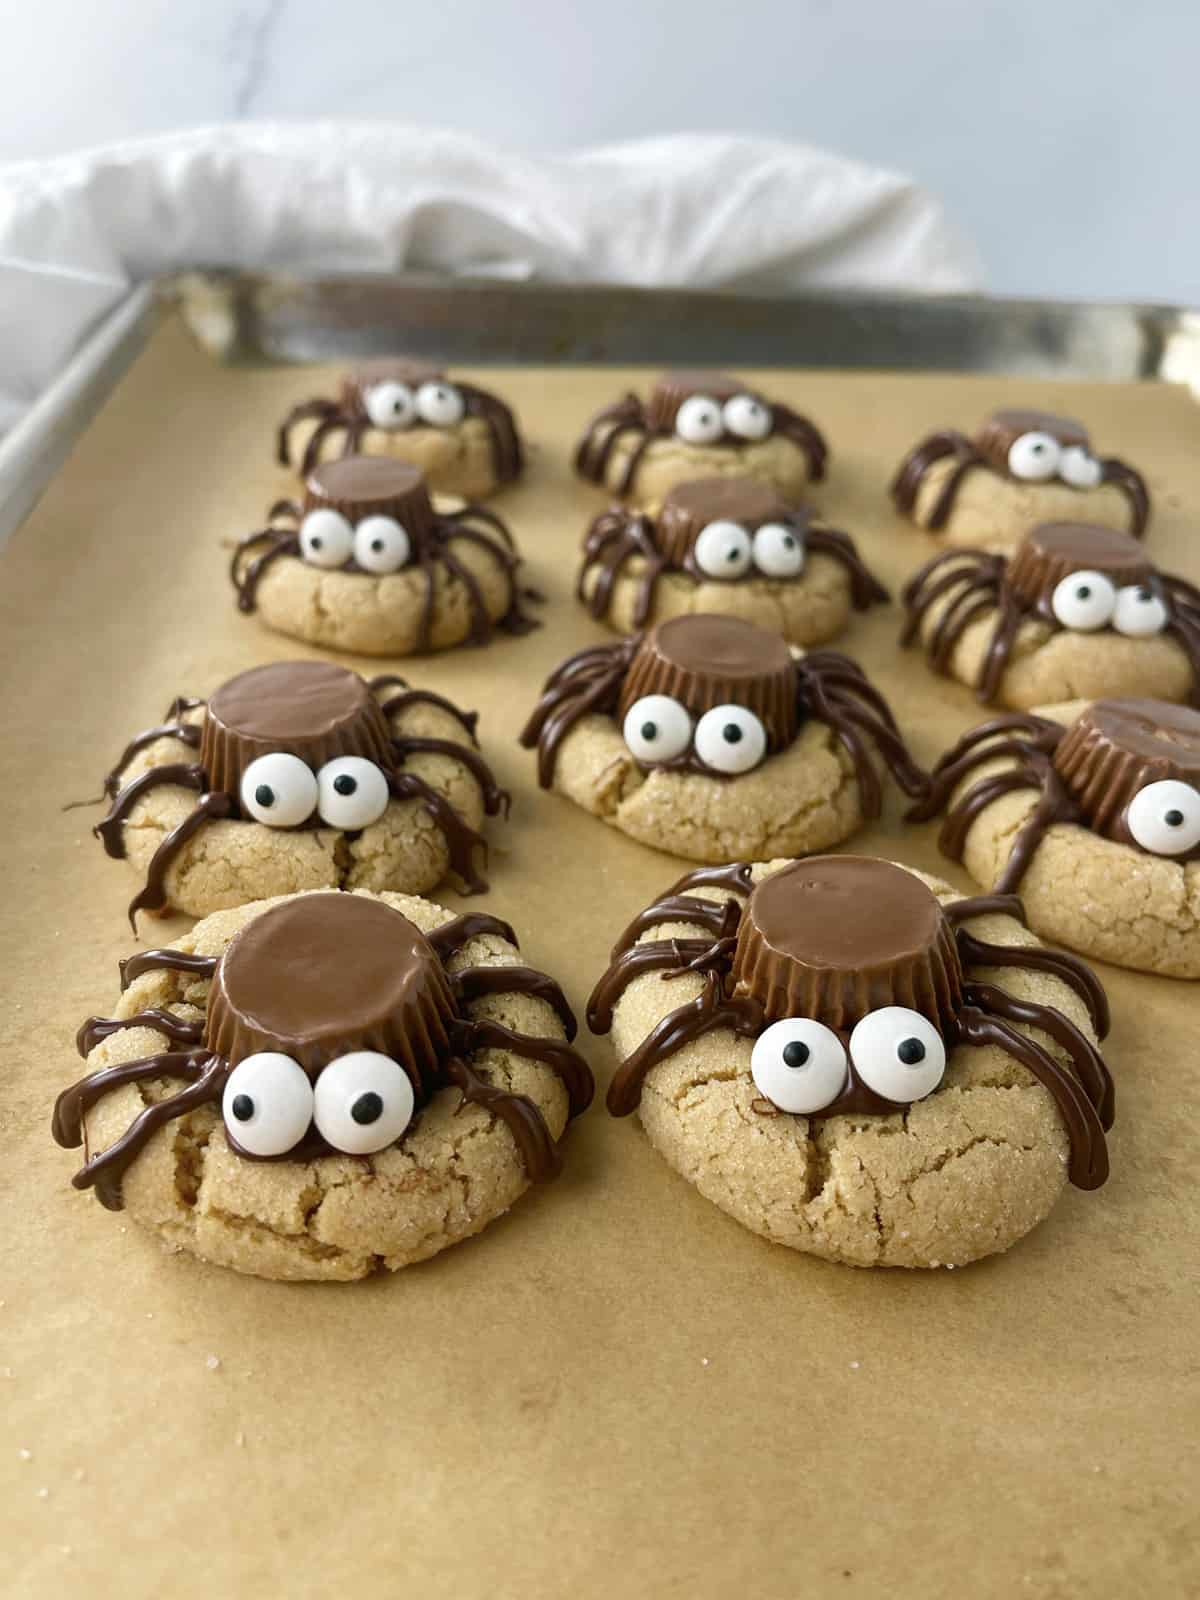 Spider cookies on a cookie sheet.